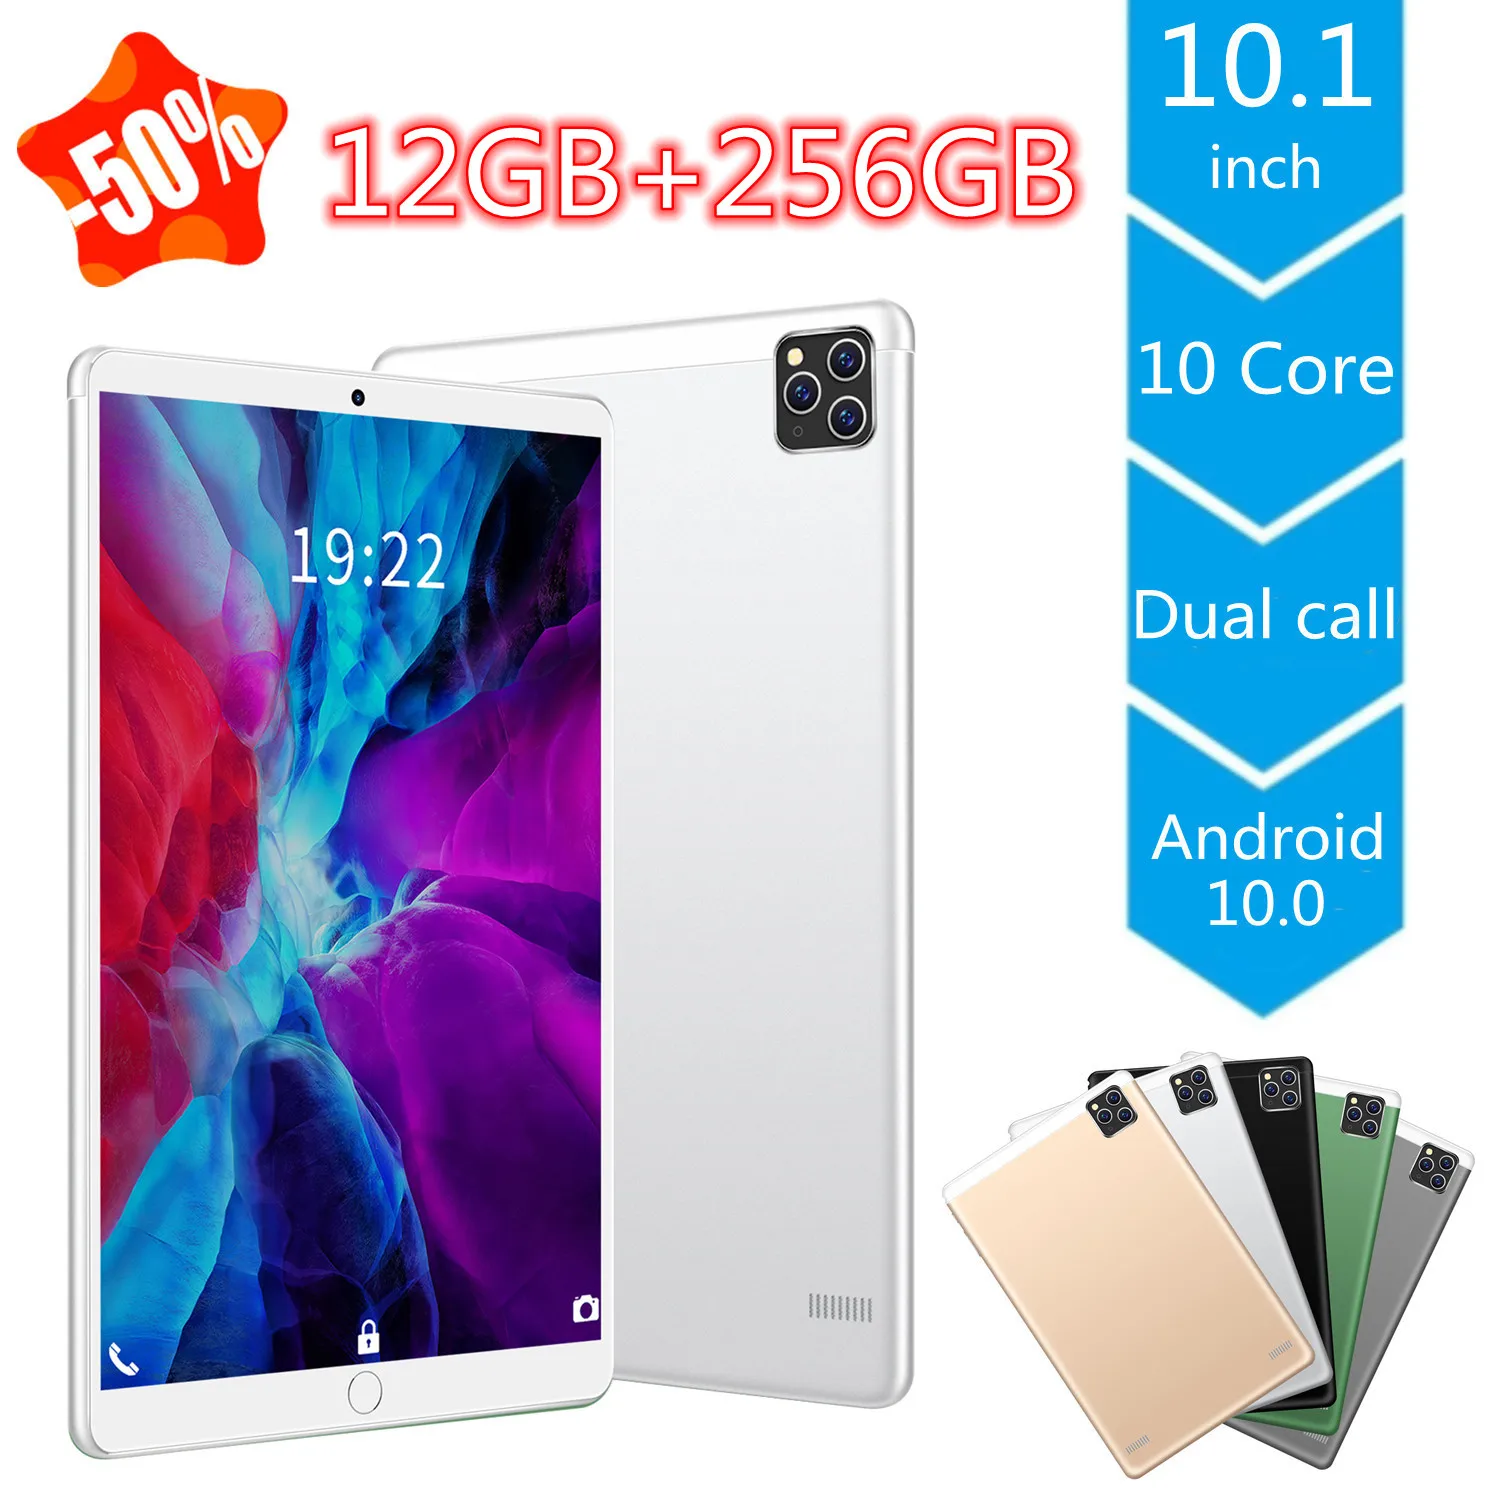 11 inch Tablet Pro, with Speaker, Phone, 12GB RAM, 256GB ROM, Android 10.0, Dual Call, GPS, Bluetooth, Google Play